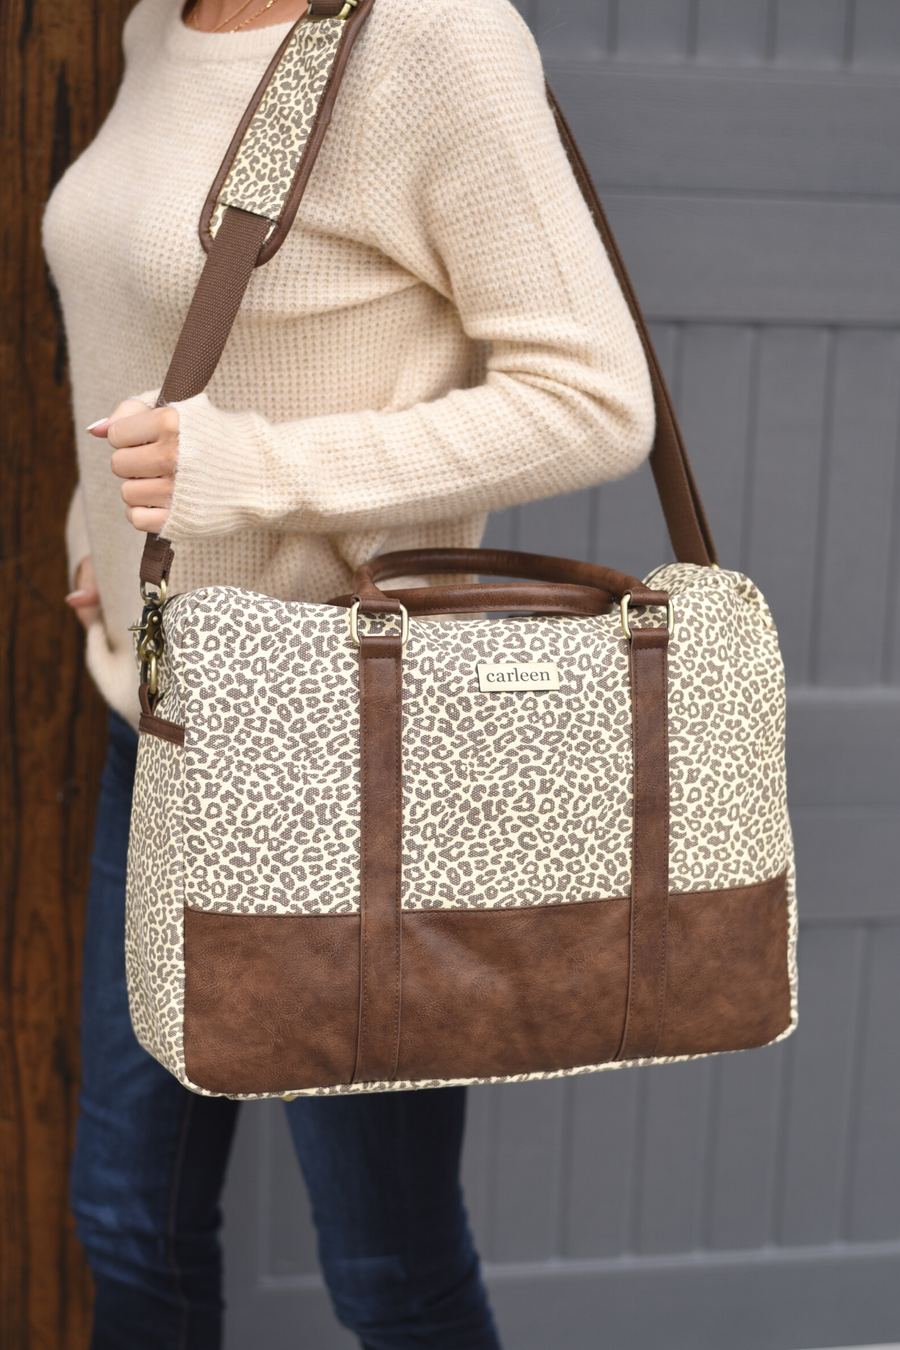 [Slight Defect] Down to Business Canvas Camera Bag - Leopard